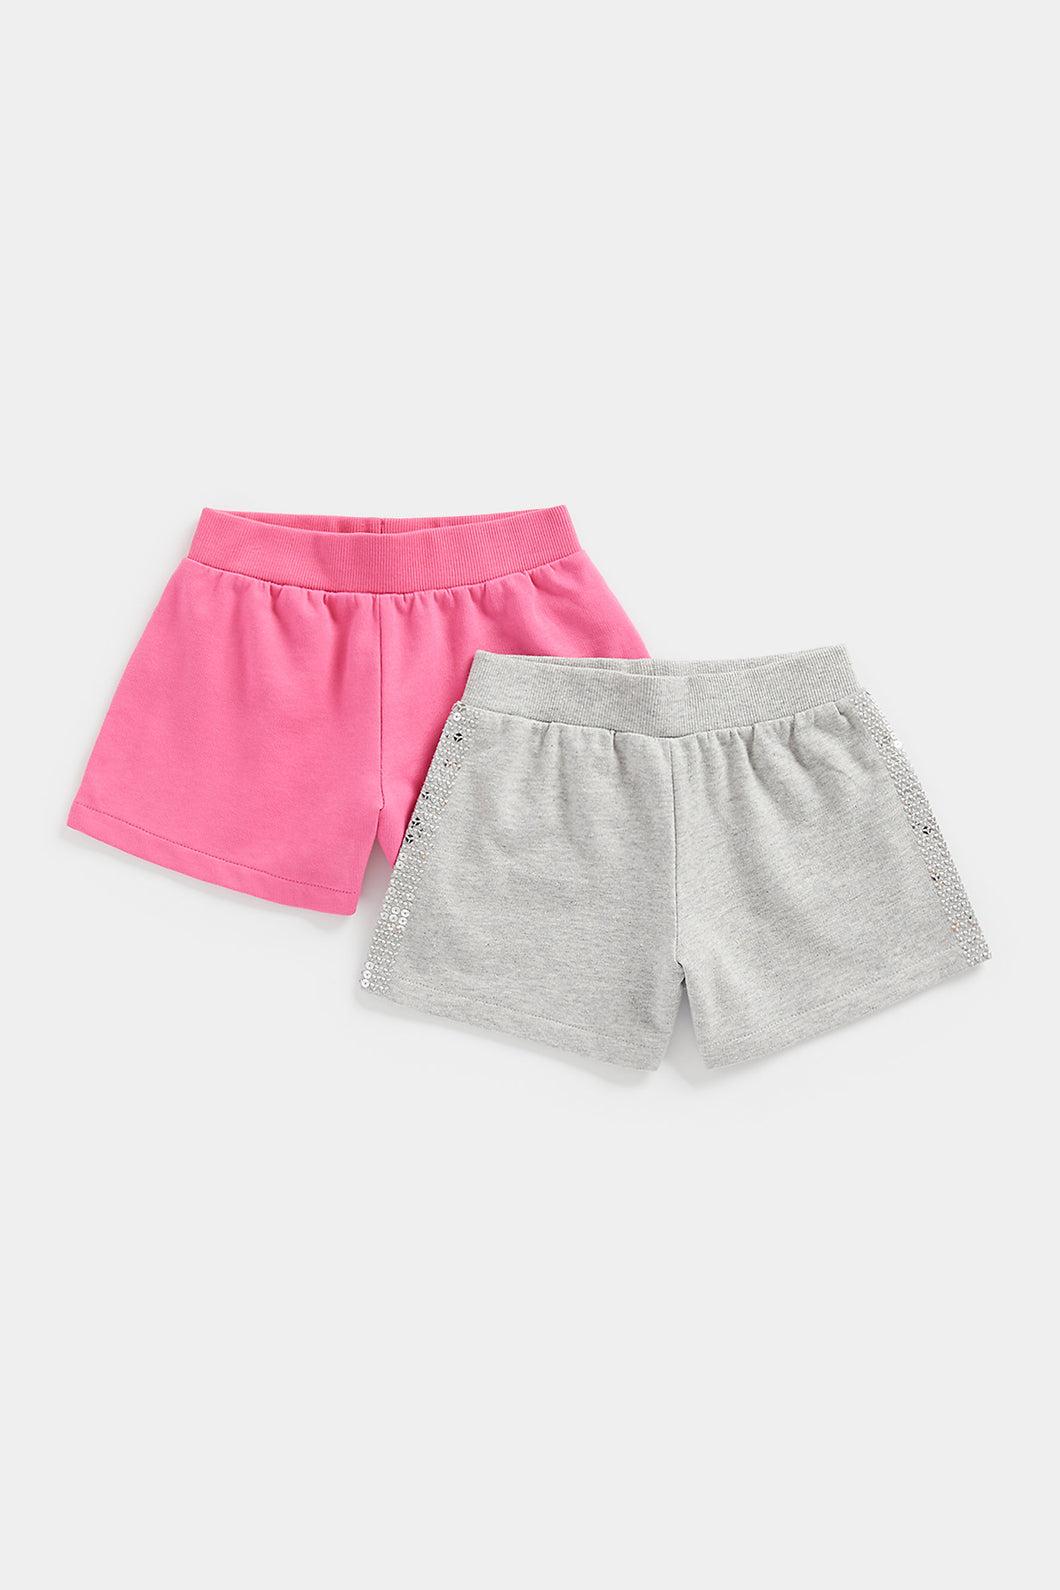 Mothercare Pink And Grey Jersey Shorts - 2 Pack